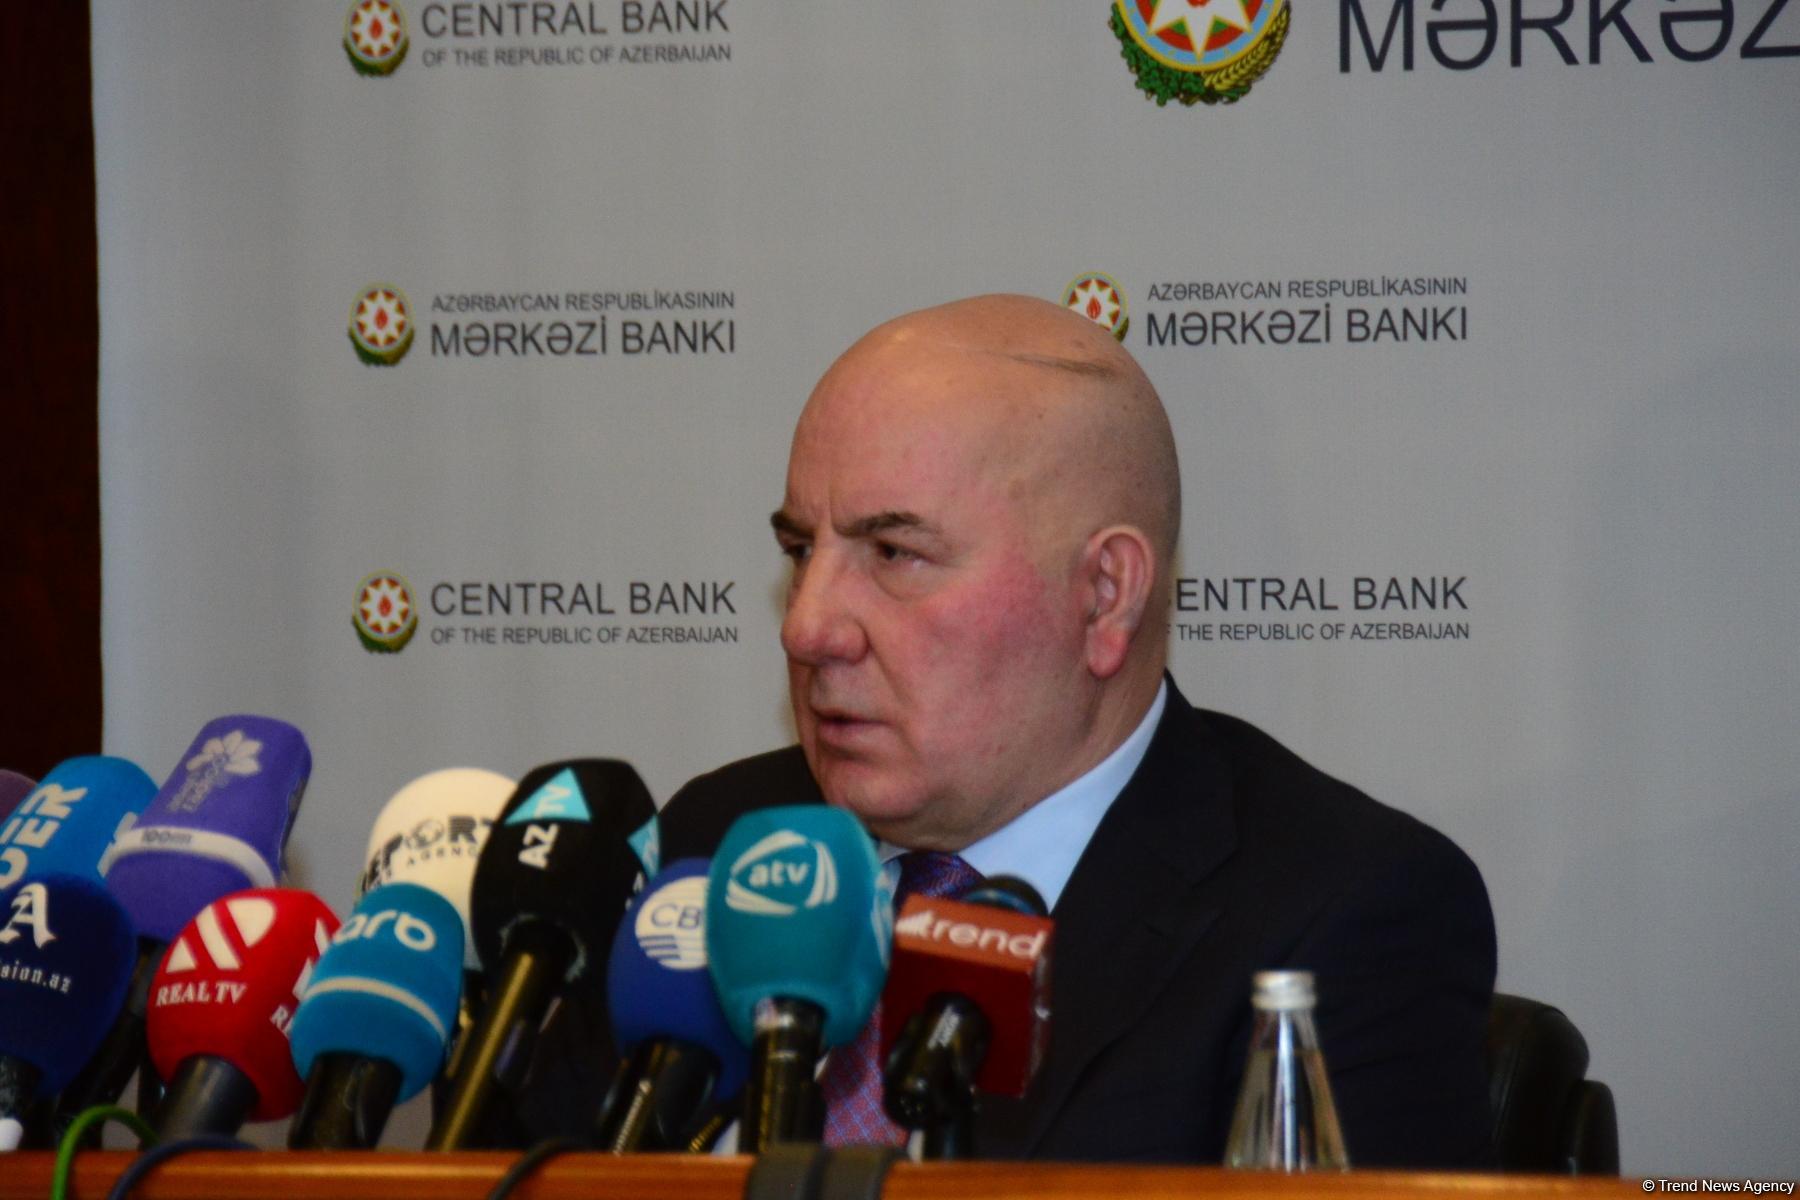 Central Bank of Azerbaijan: Work to improve banking sector to continue